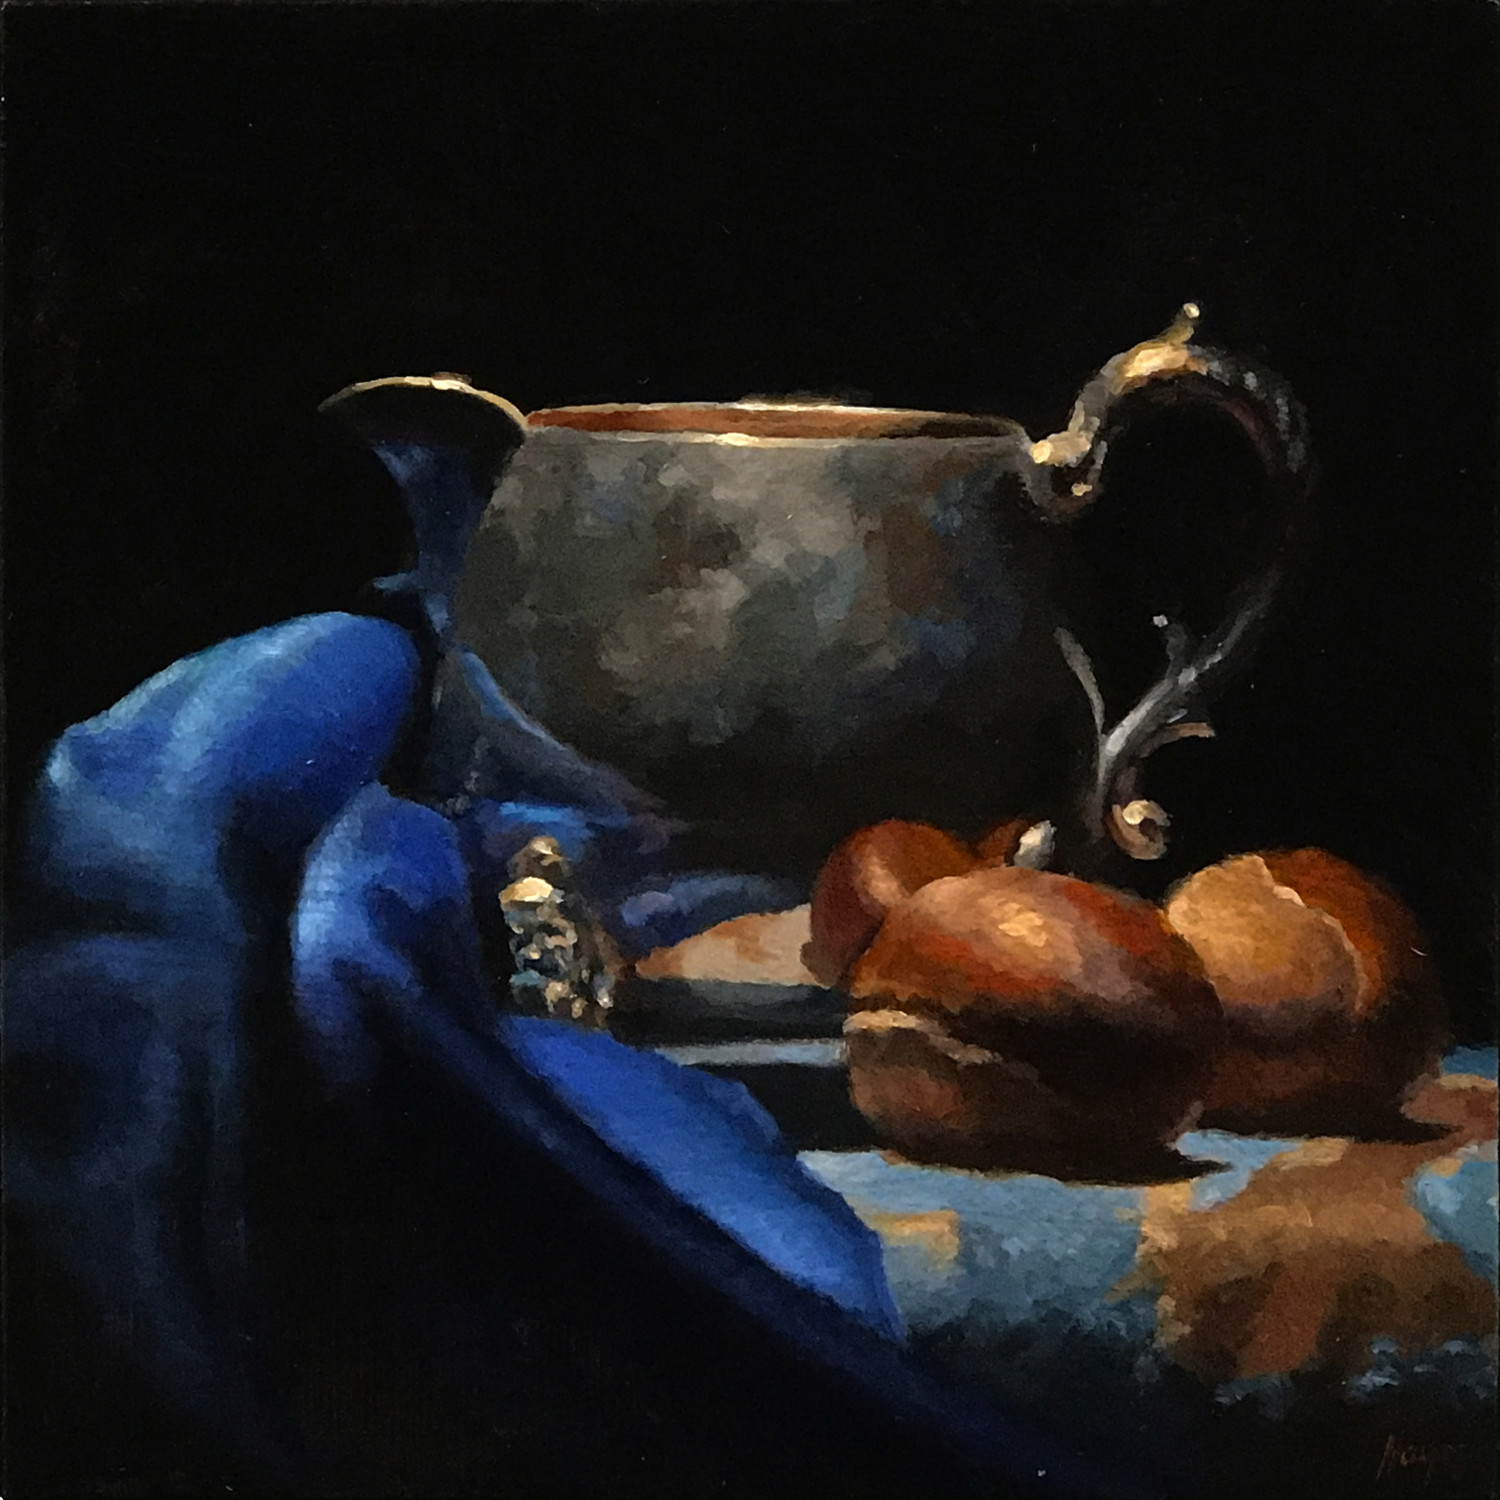 "Silver, Chestnuts, Velvet" oil on panel, 5x5 inches. View this painting.